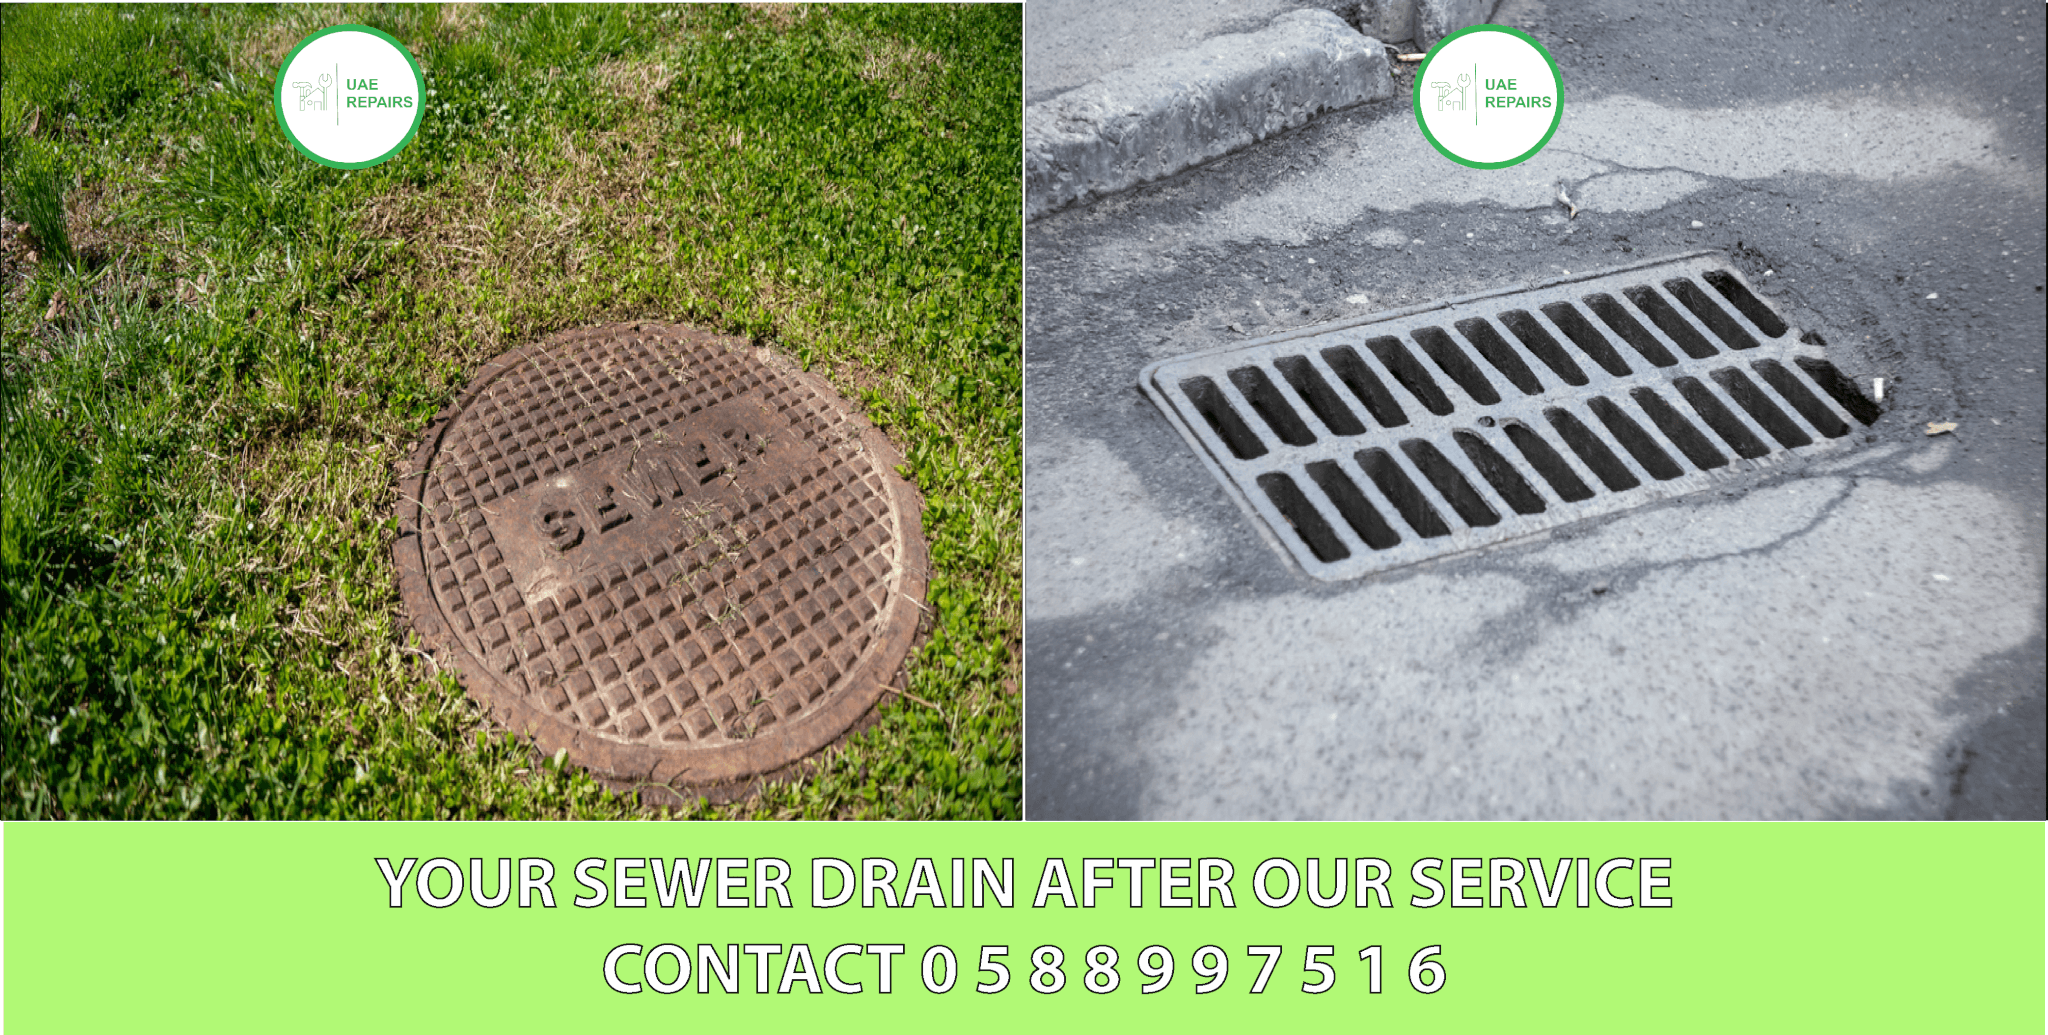 UARE REPAIRS Your Sewer Drains After Our Service